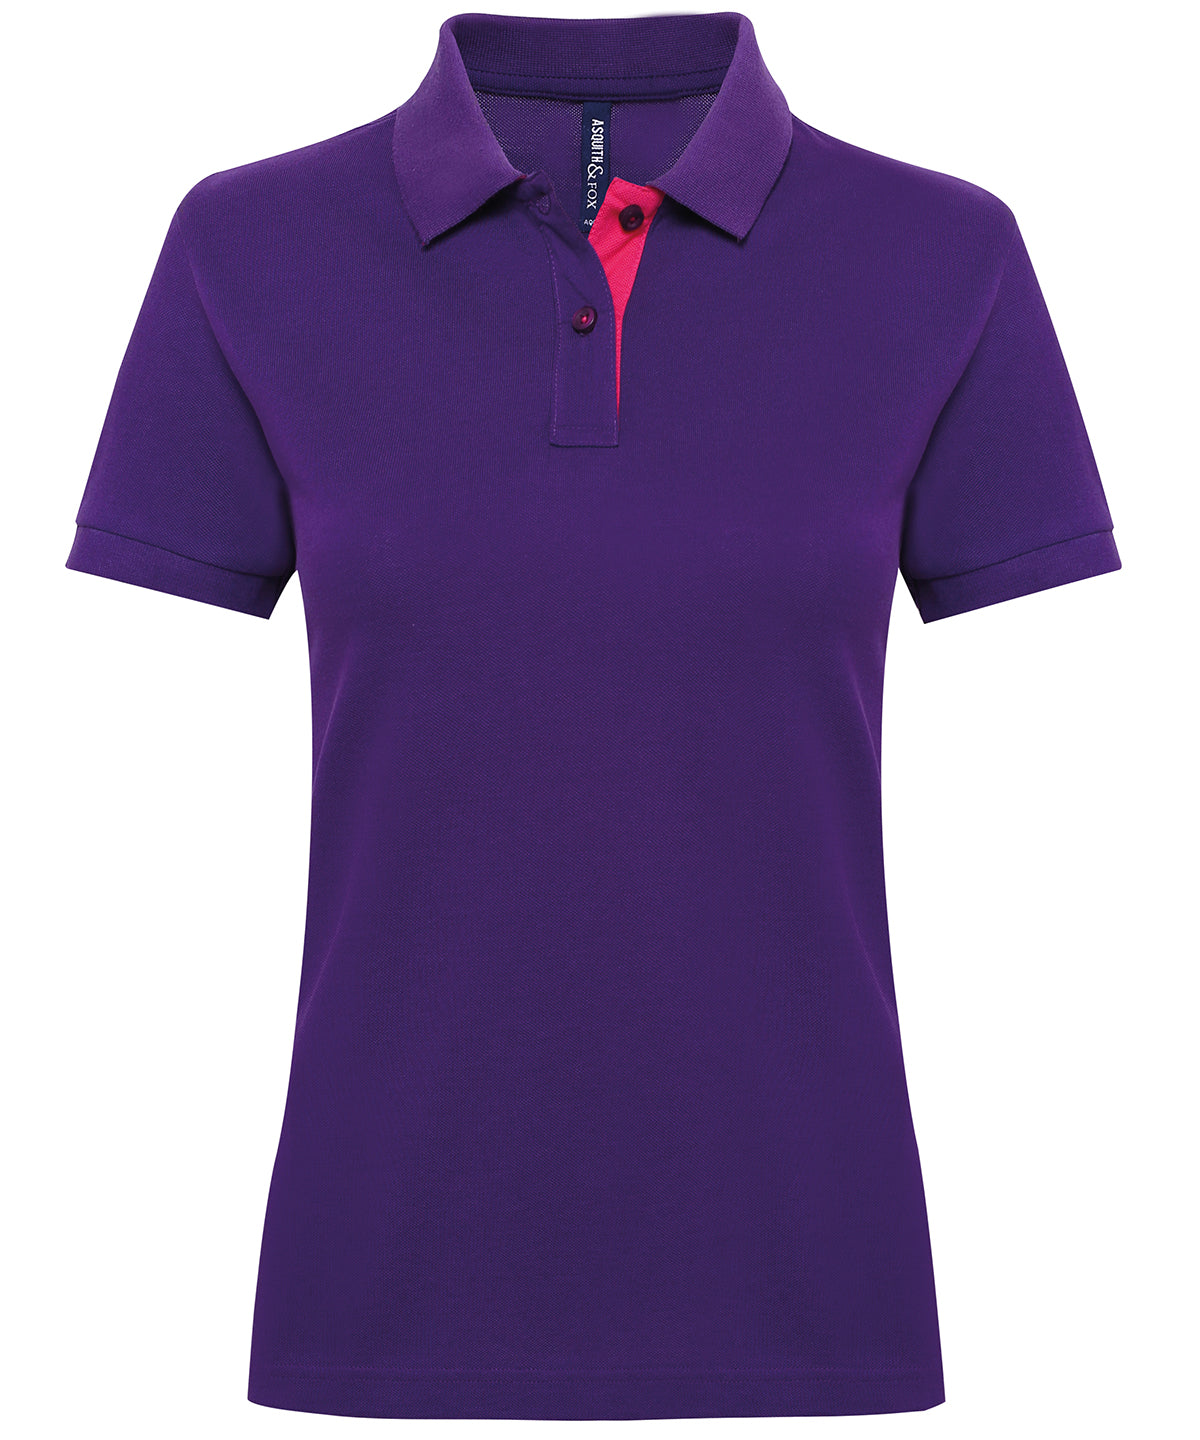 Personalised Polo Shirts - Black Asquith & Fox Women's contrast polo